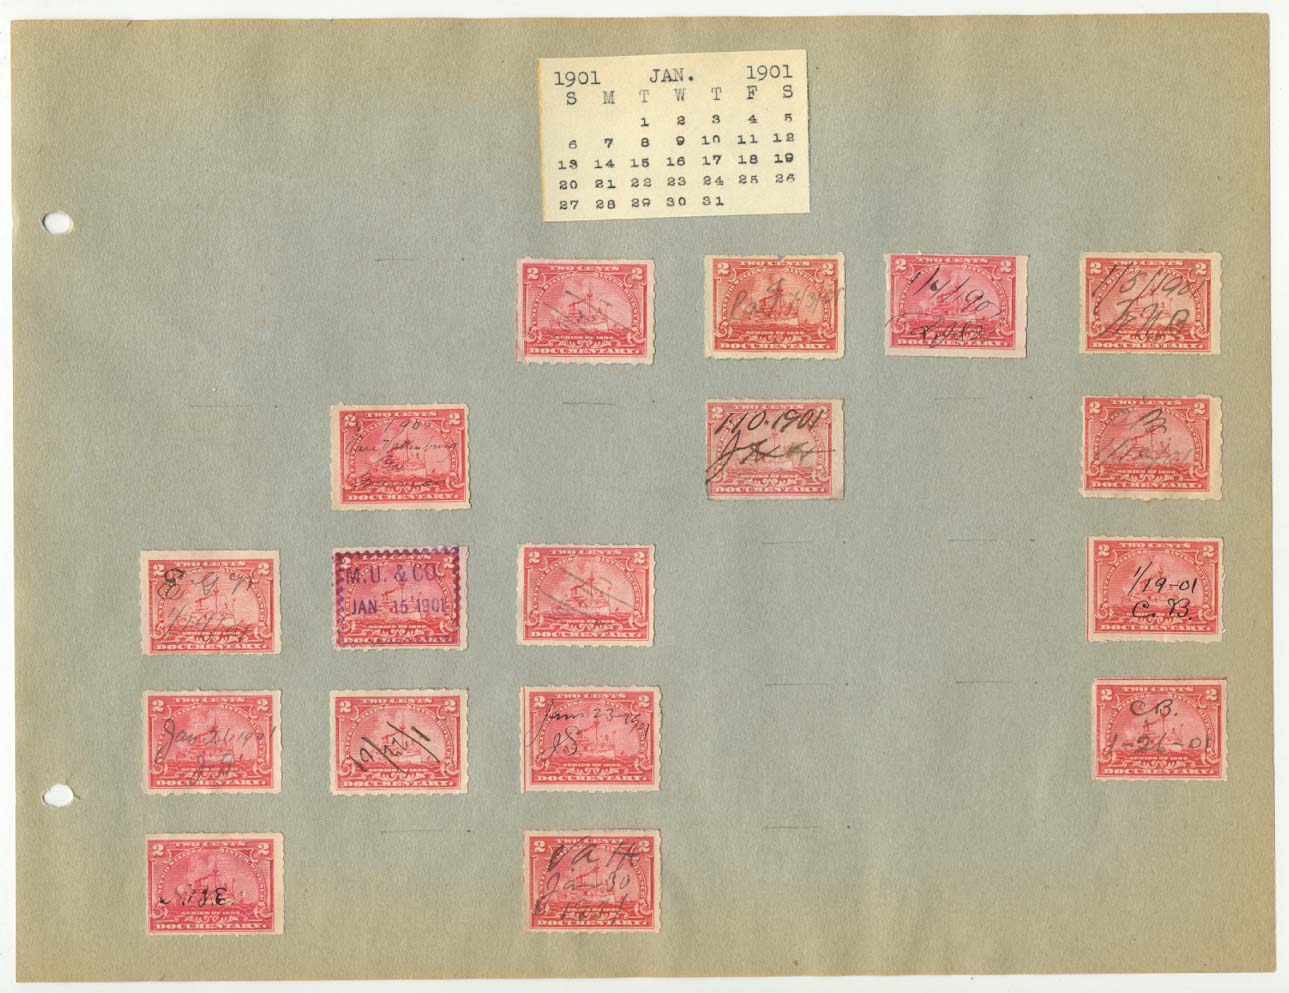 Revenue Stamp Collection January 1901